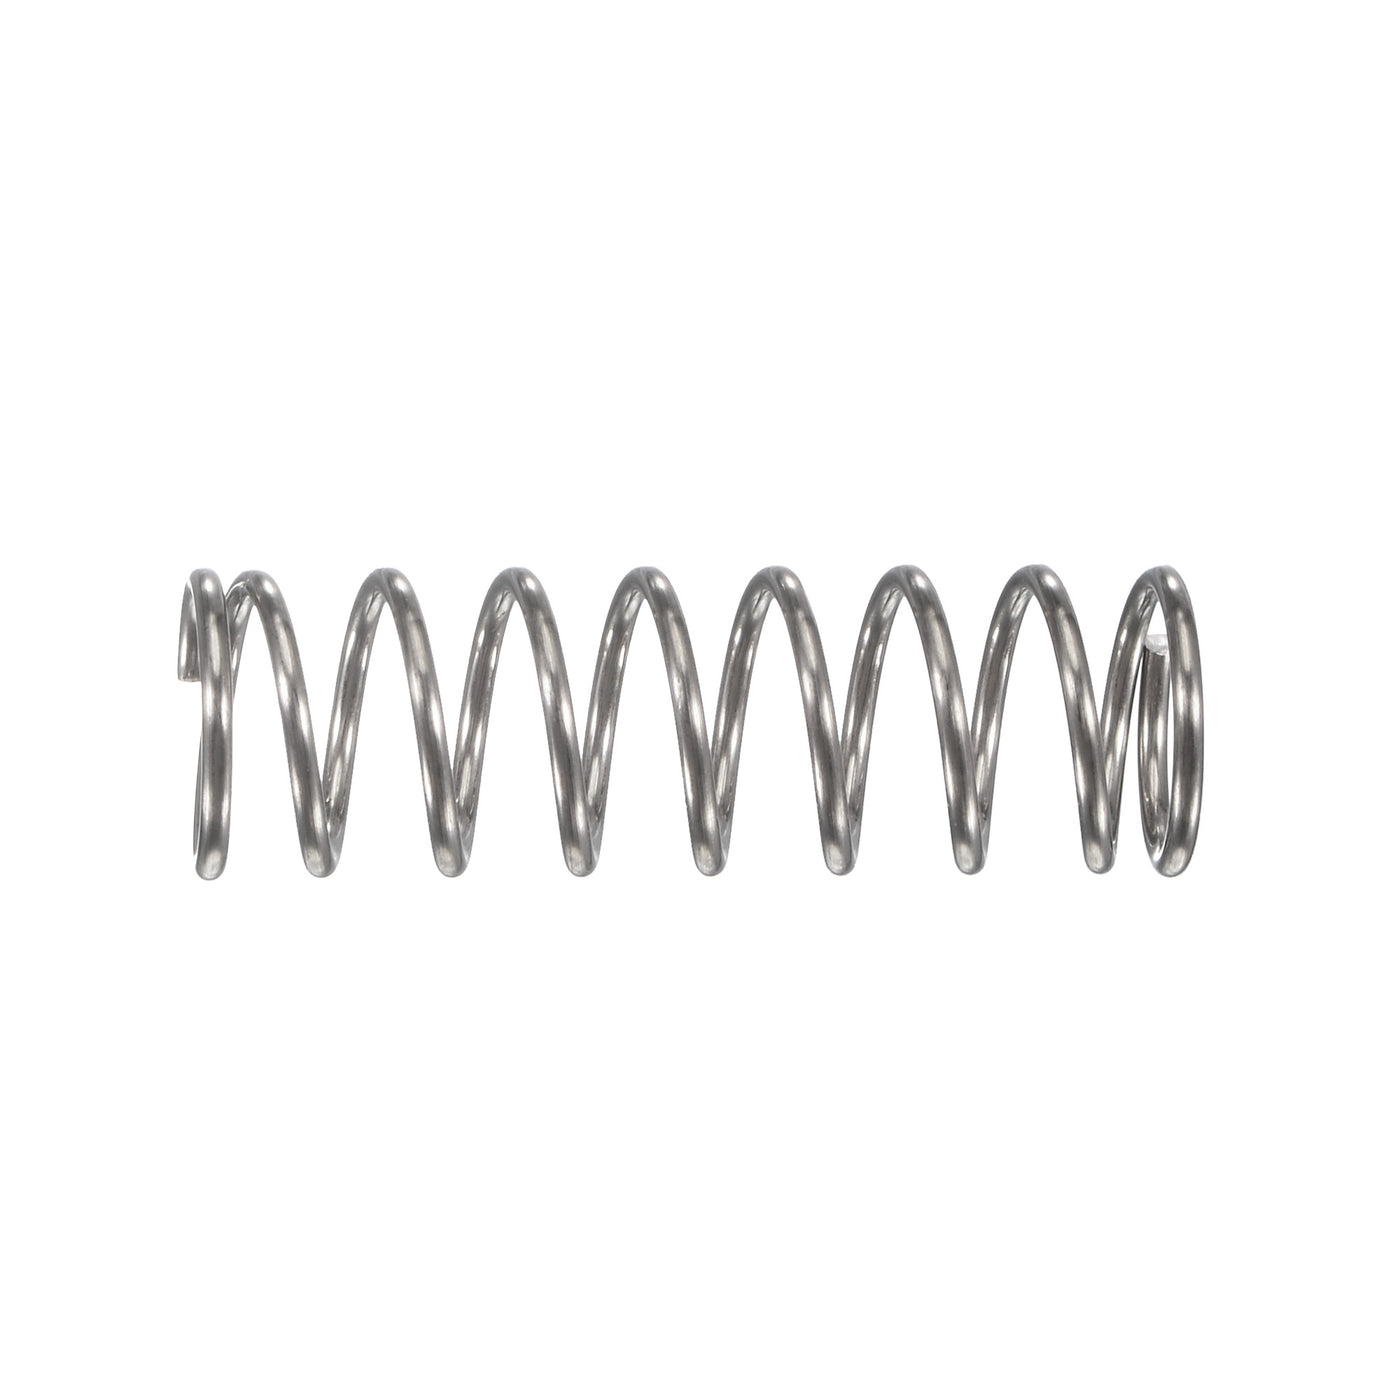 uxcell Uxcell 8mmx0.8mmx25mm 304 Stainless Steel Compression Spring 11.8N Load Capacity 10pcs